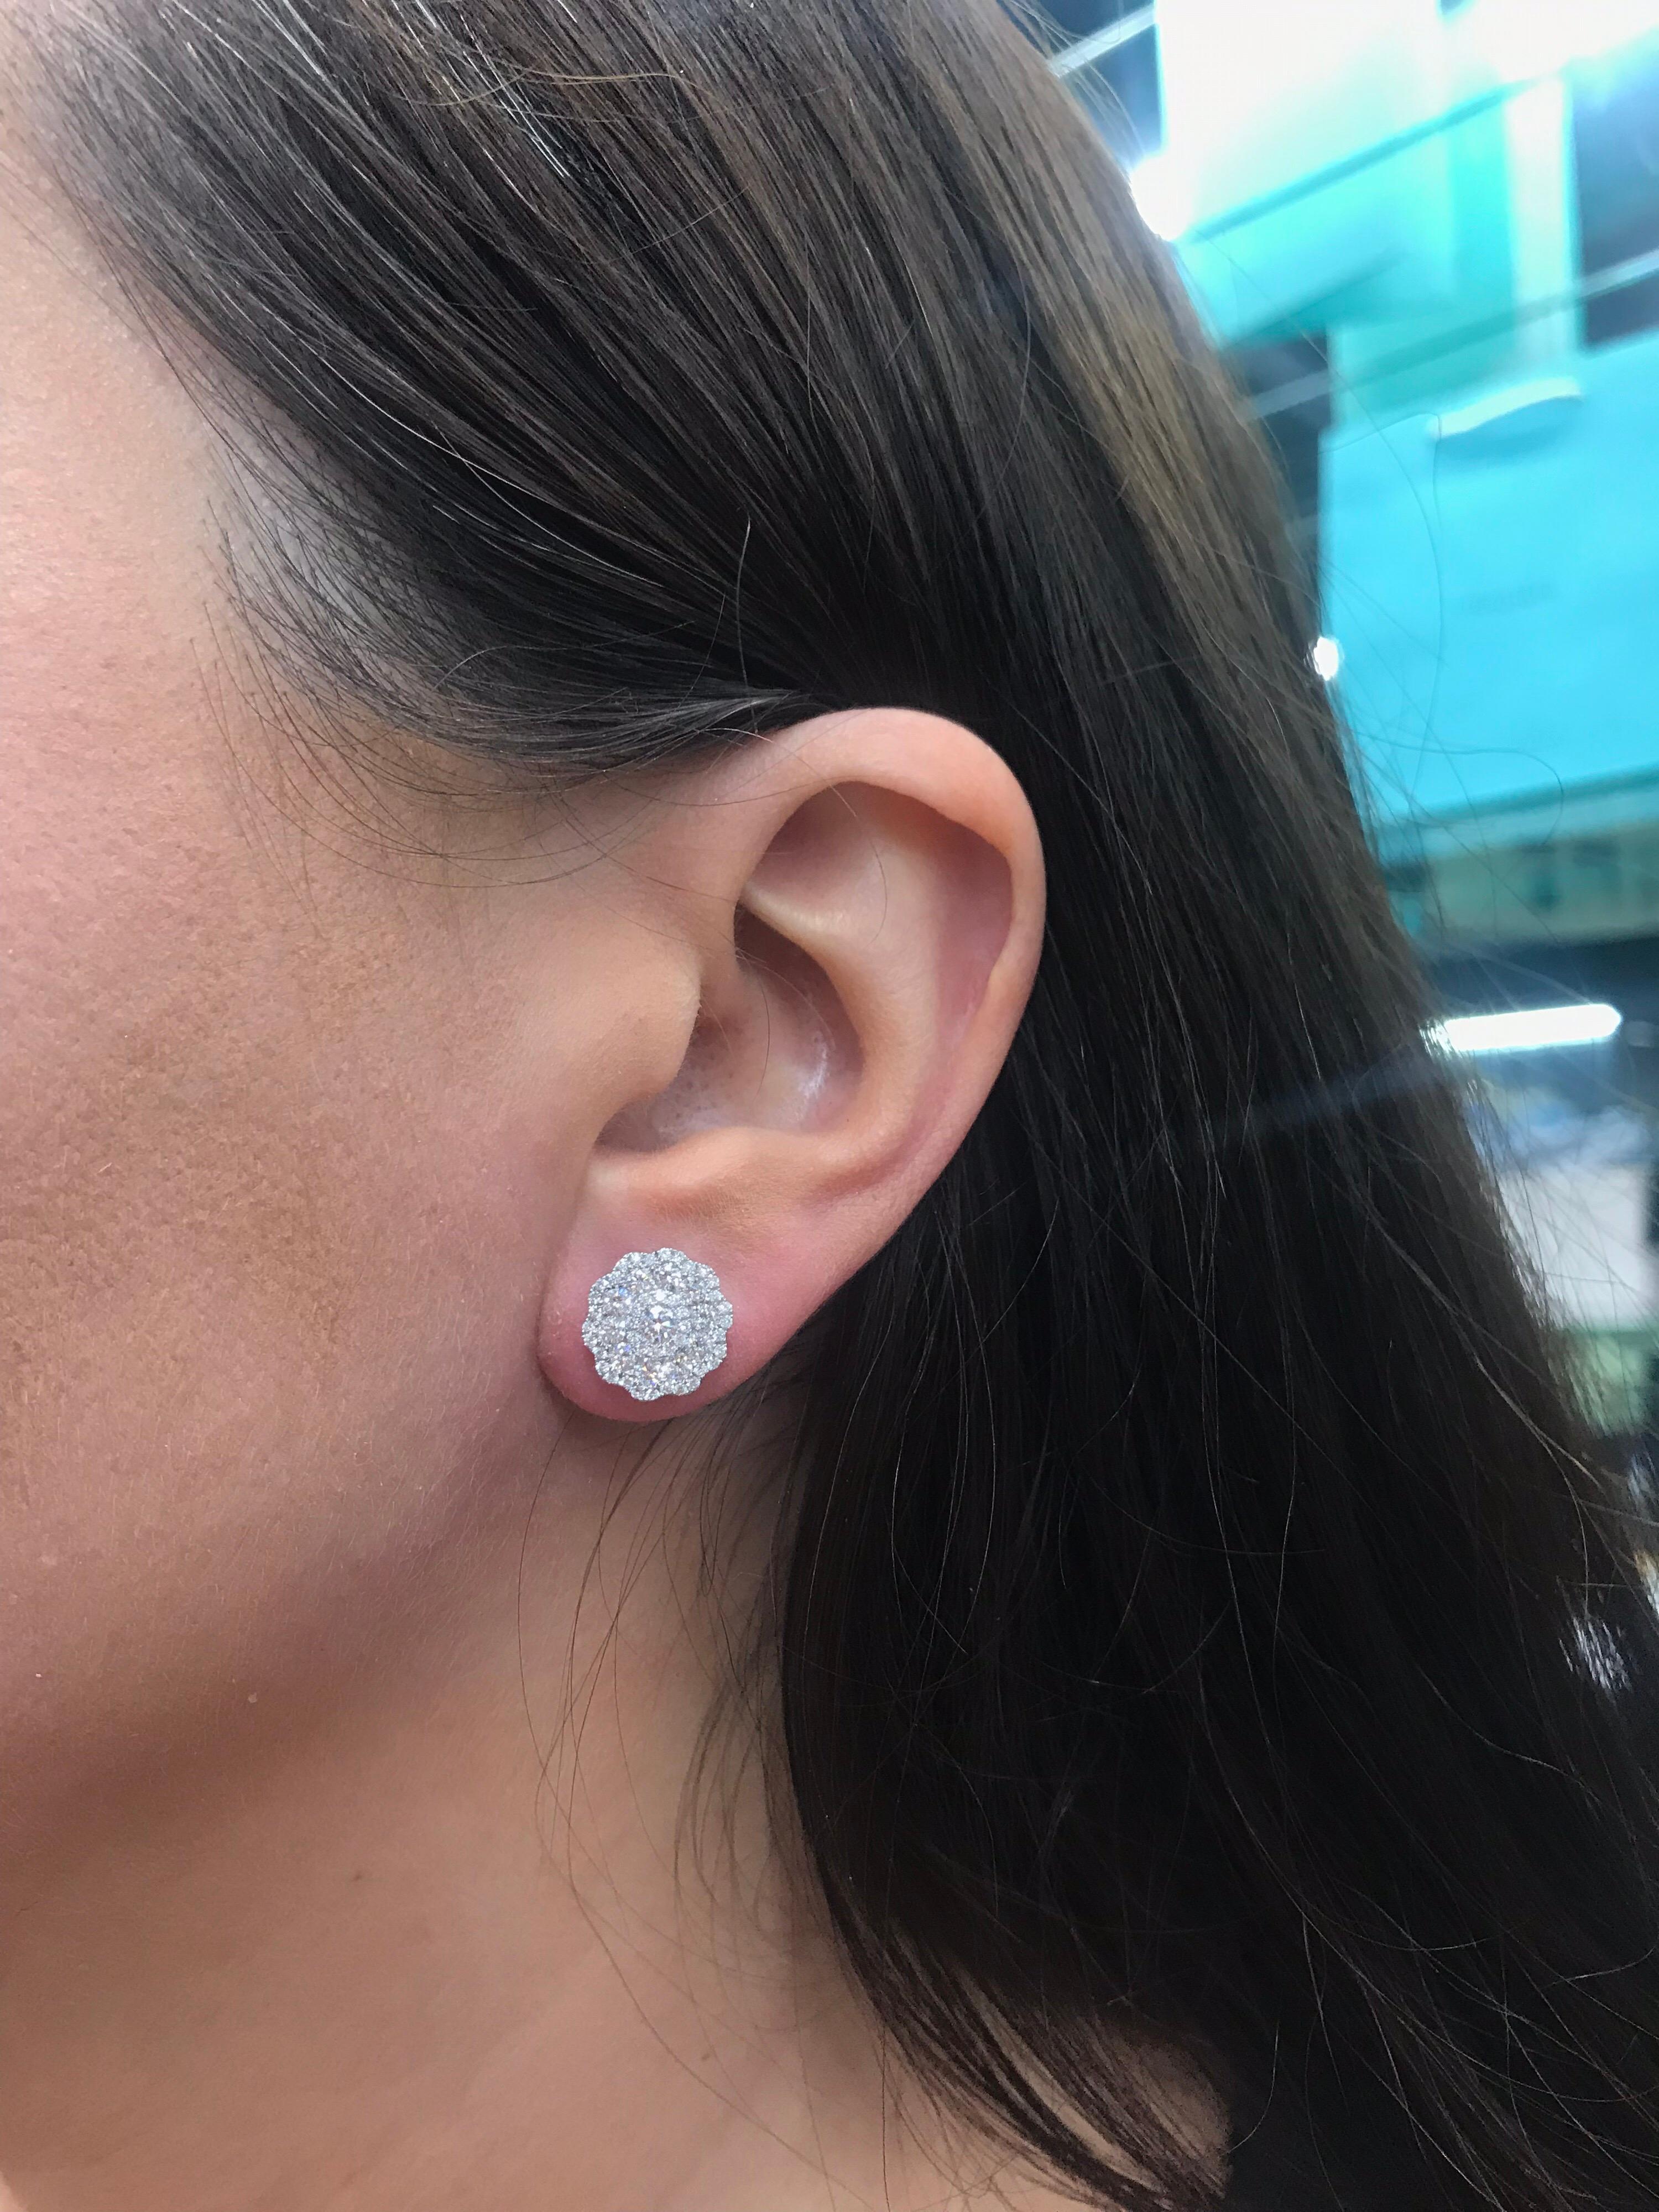 18K White Gold diamond cluster earrings featuring five rows of alternating sizes of round brilliants weighing 1.38 carats.
Color G
Clarity VS

A classic piece to add to your collection!